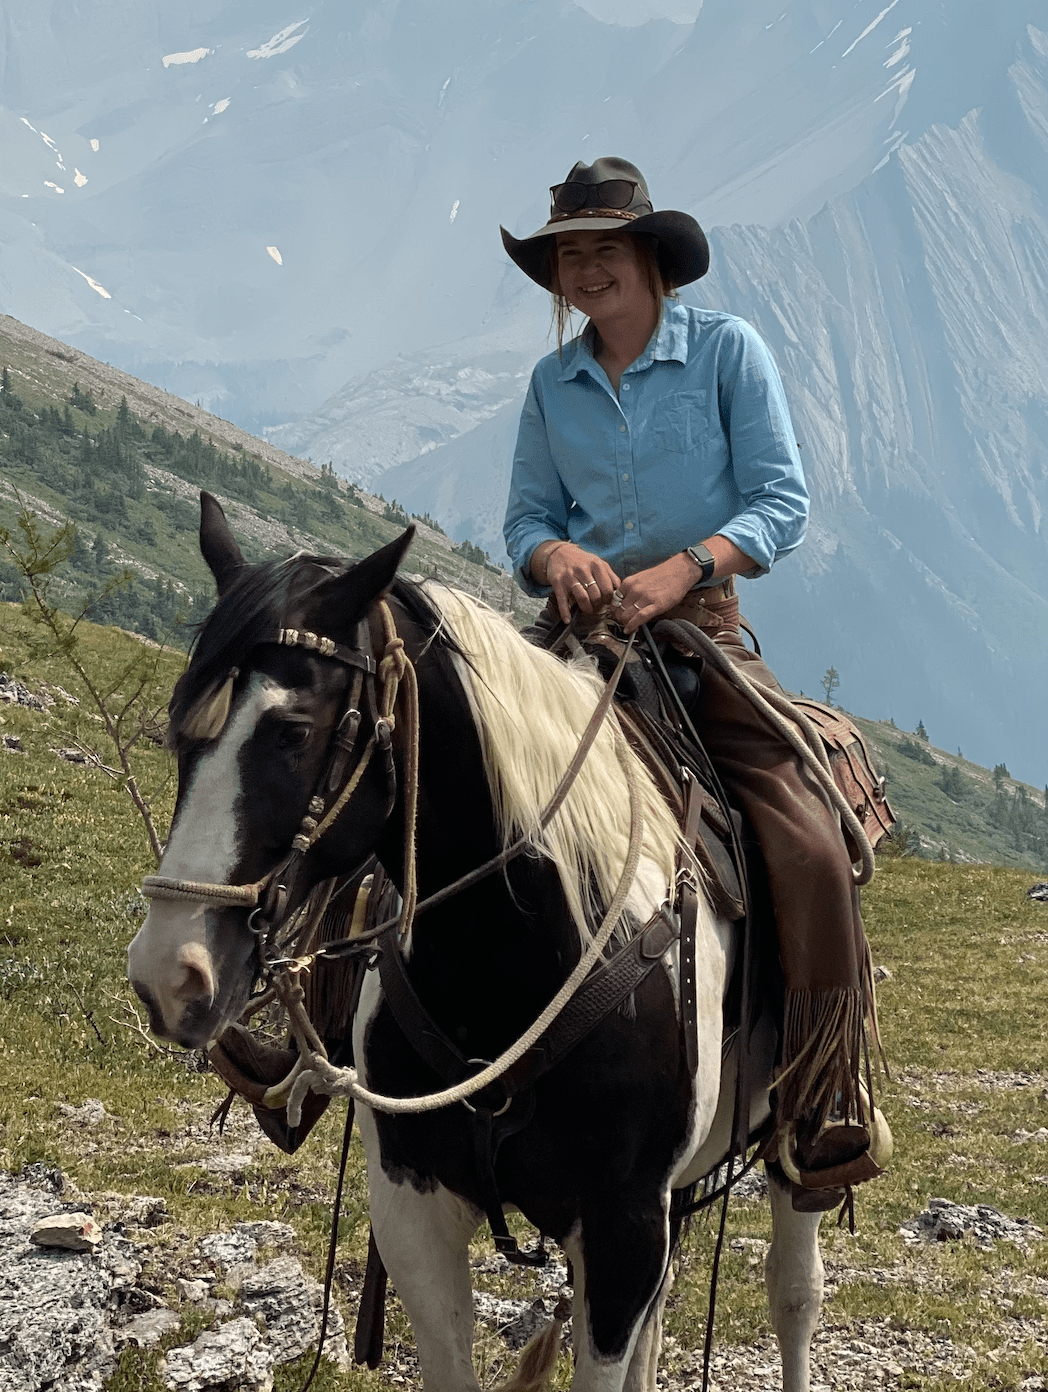 A woman riding a horse in the backcountry of the Canadian Rockies